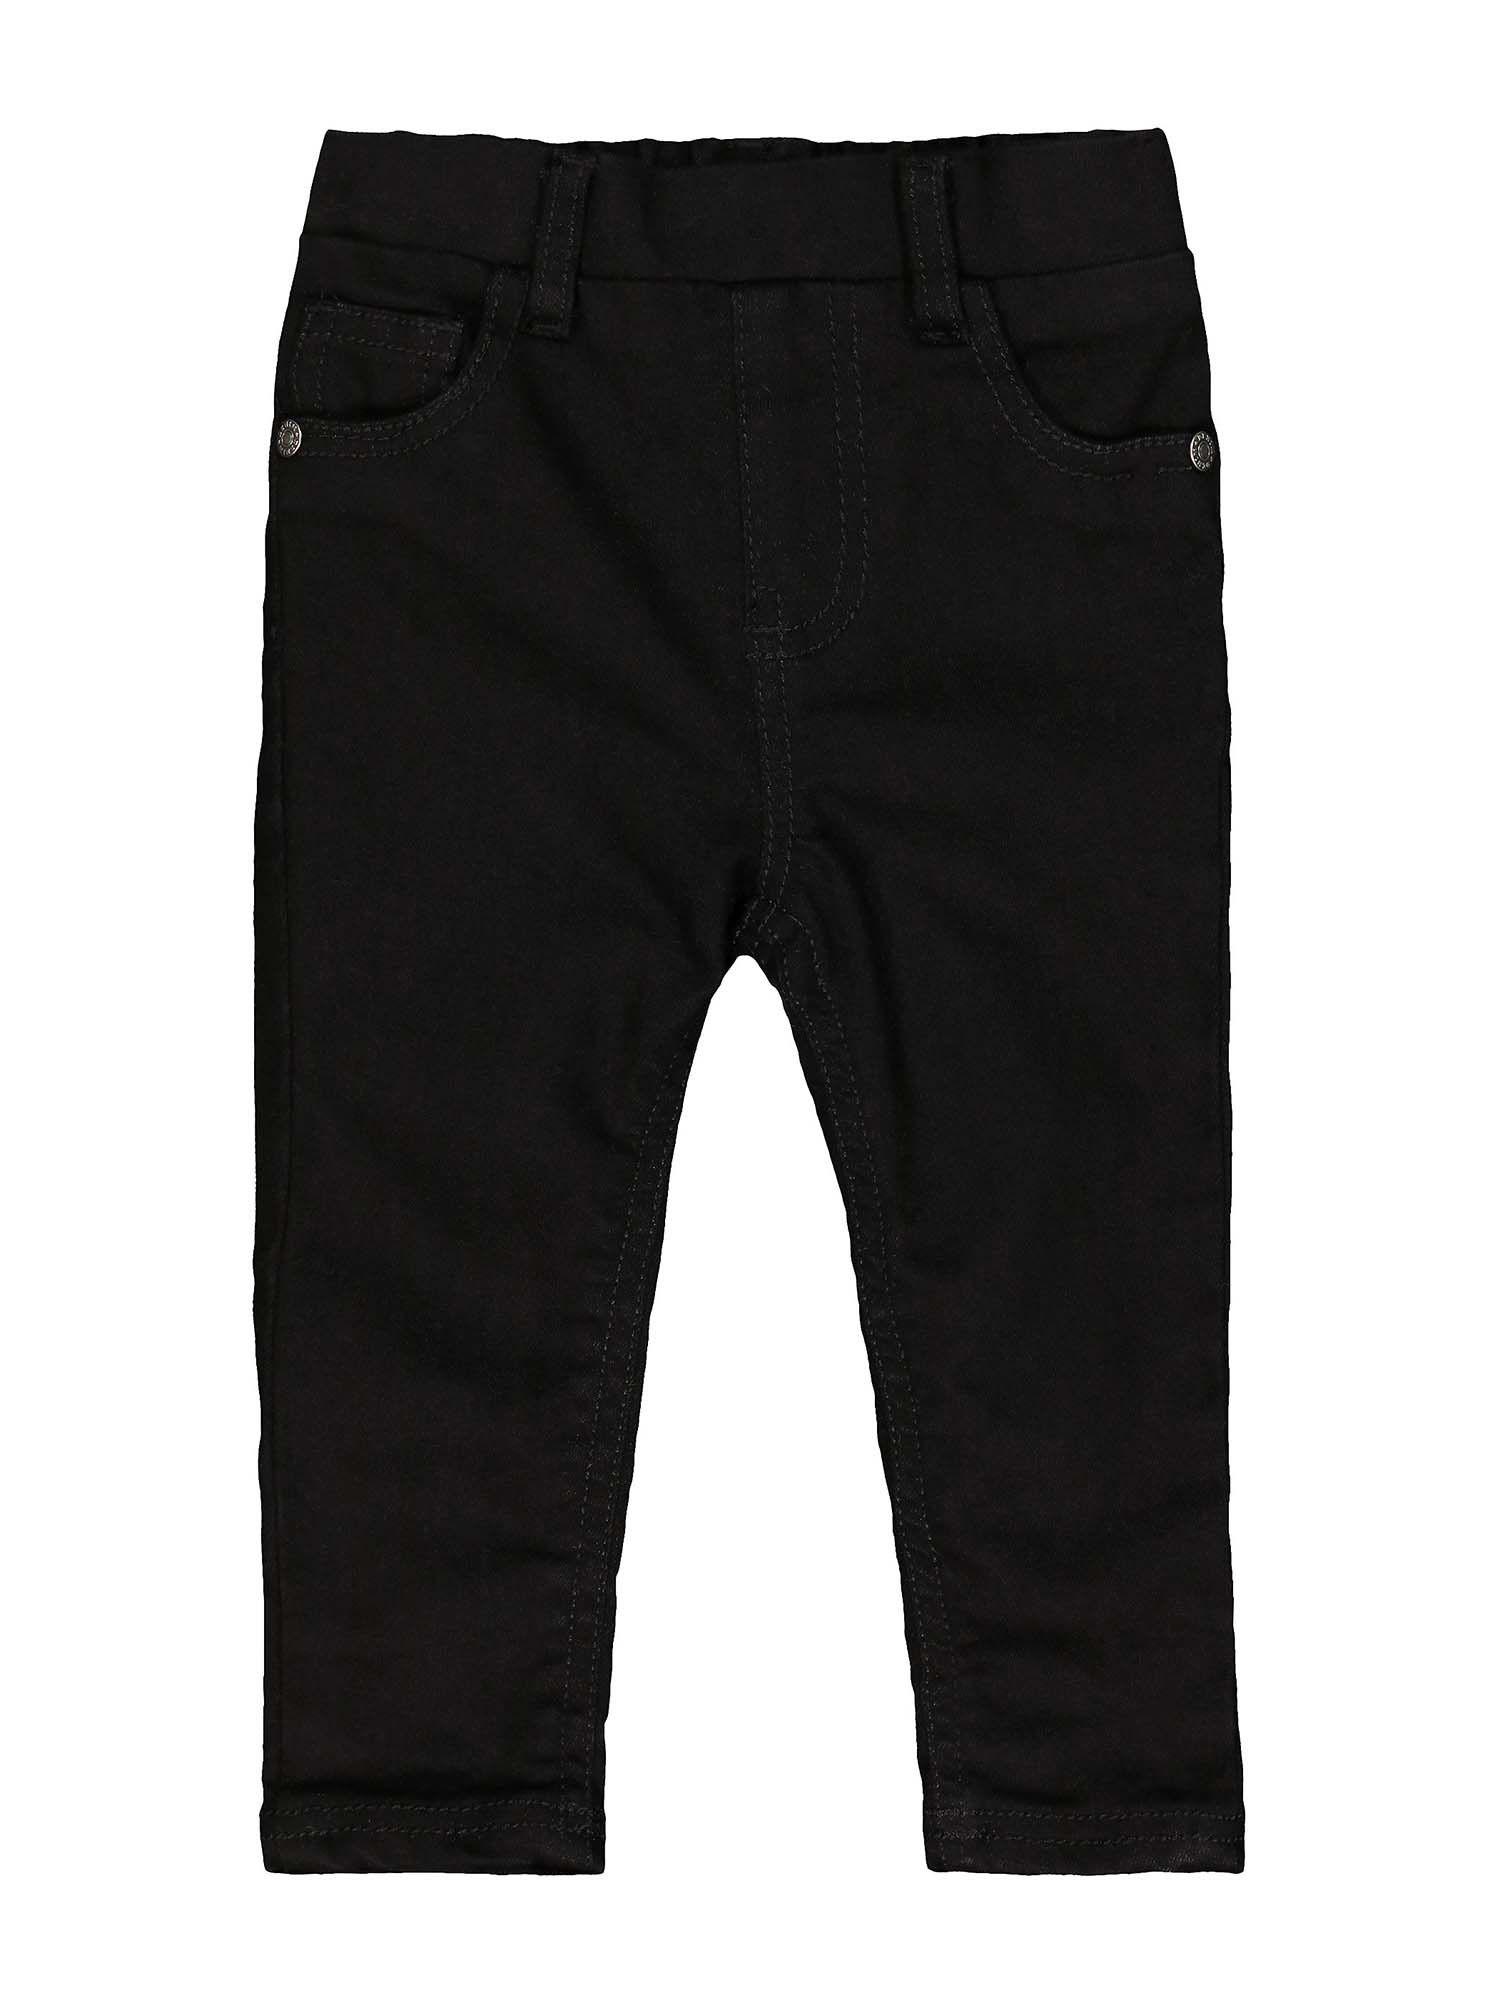 mother care black solid jeans